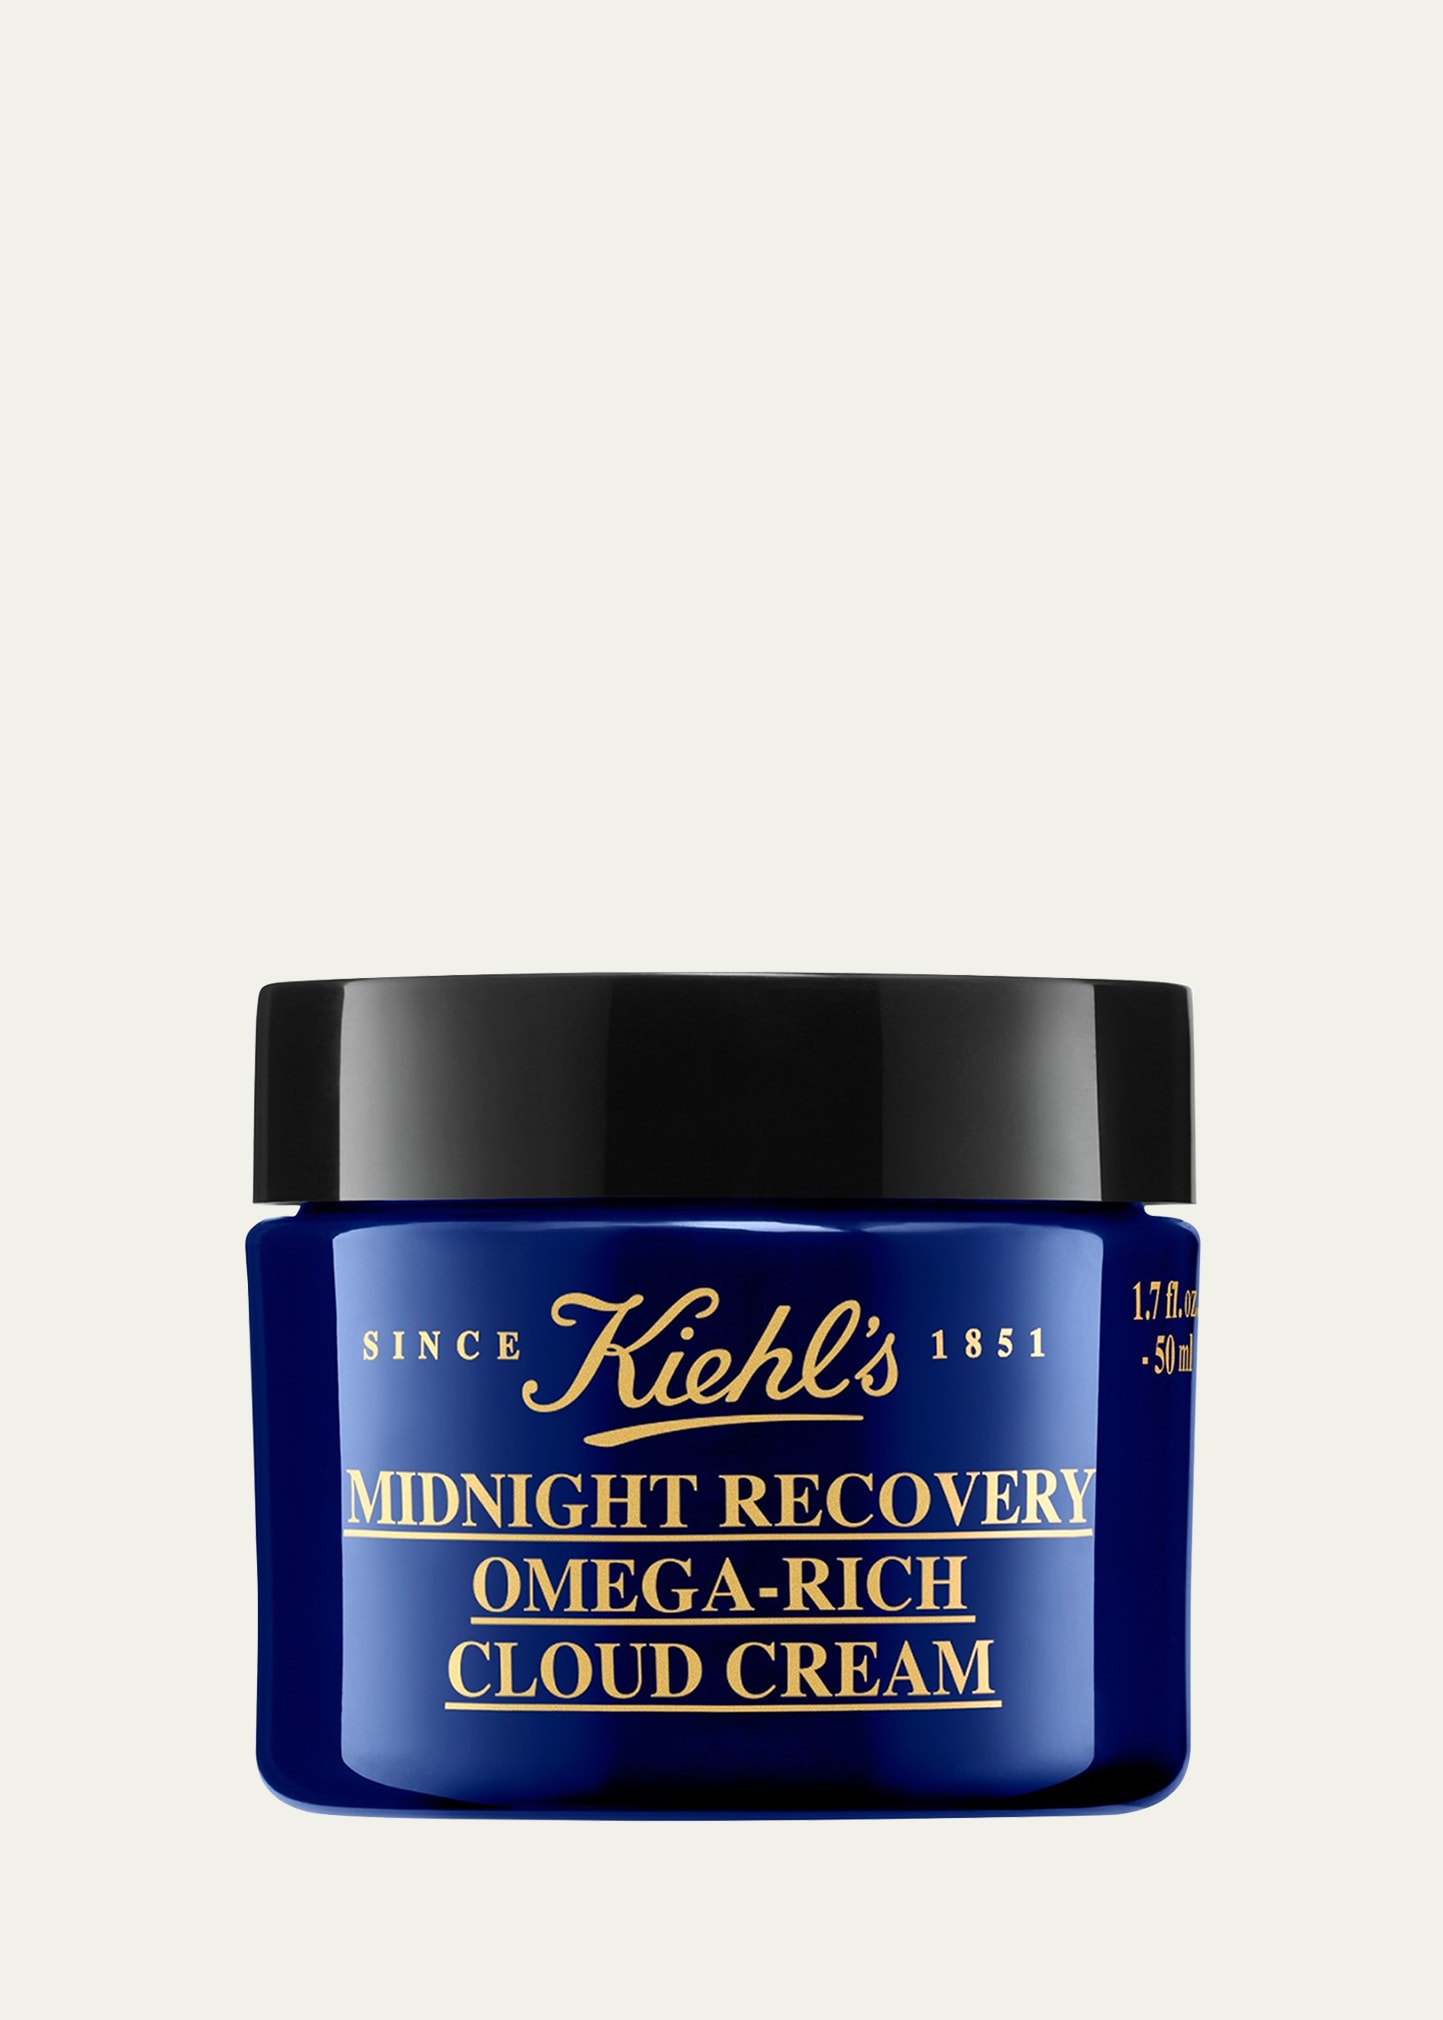 Midnight Recovery Omega Rich Cloud Cream, 1.7 oz.